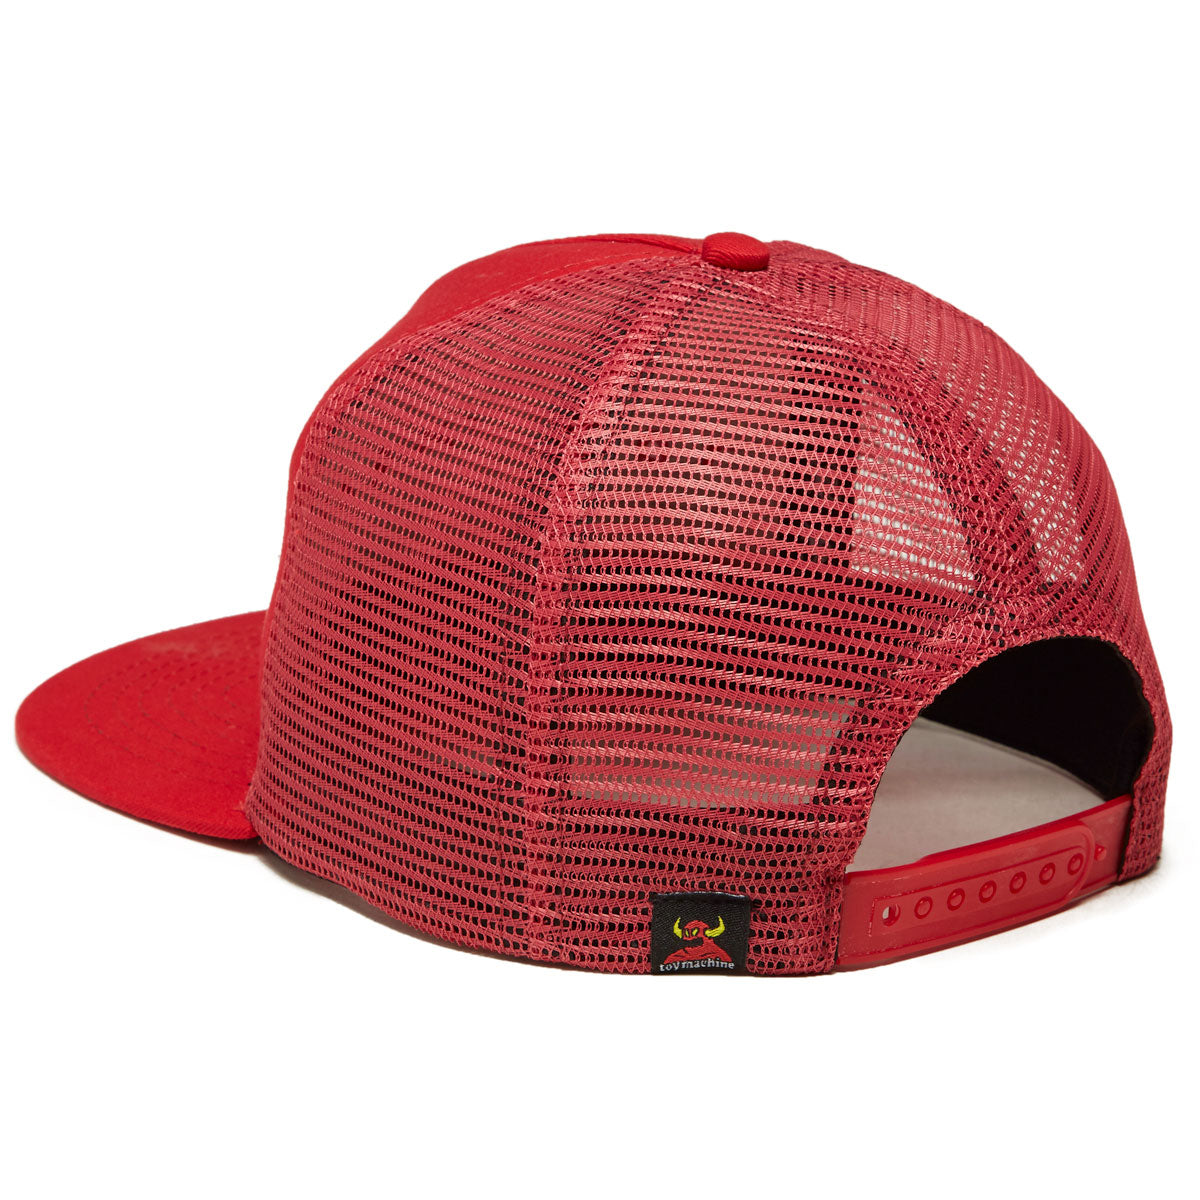 Toy Machine Fists Mesh Hat - Red image 2